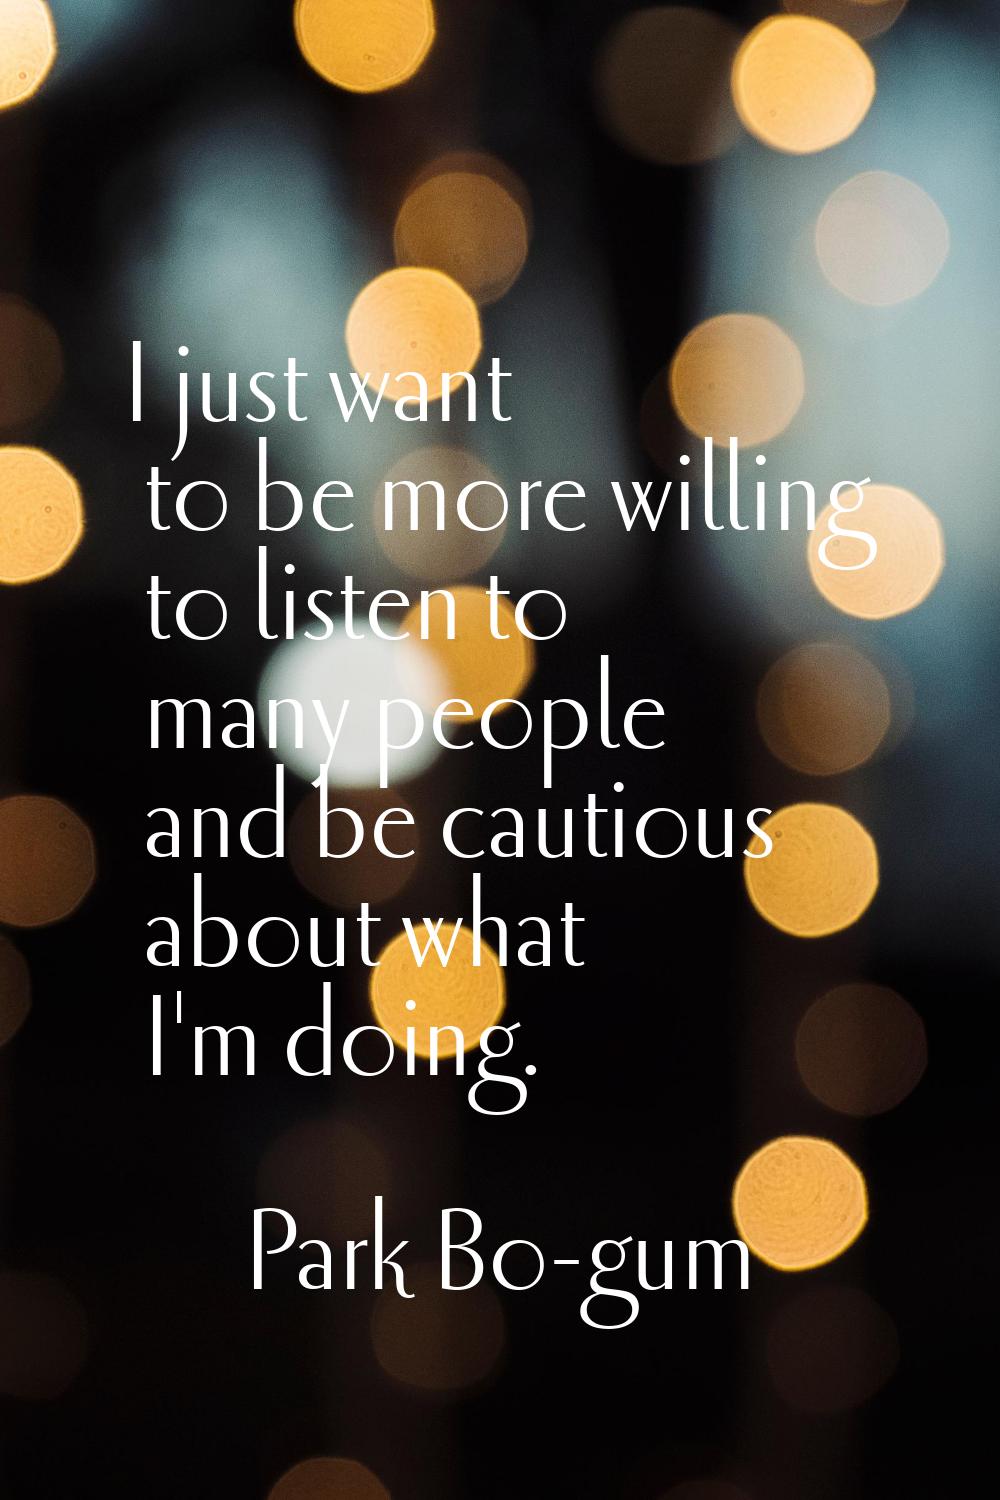 I just want to be more willing to listen to many people and be cautious about what I'm doing.